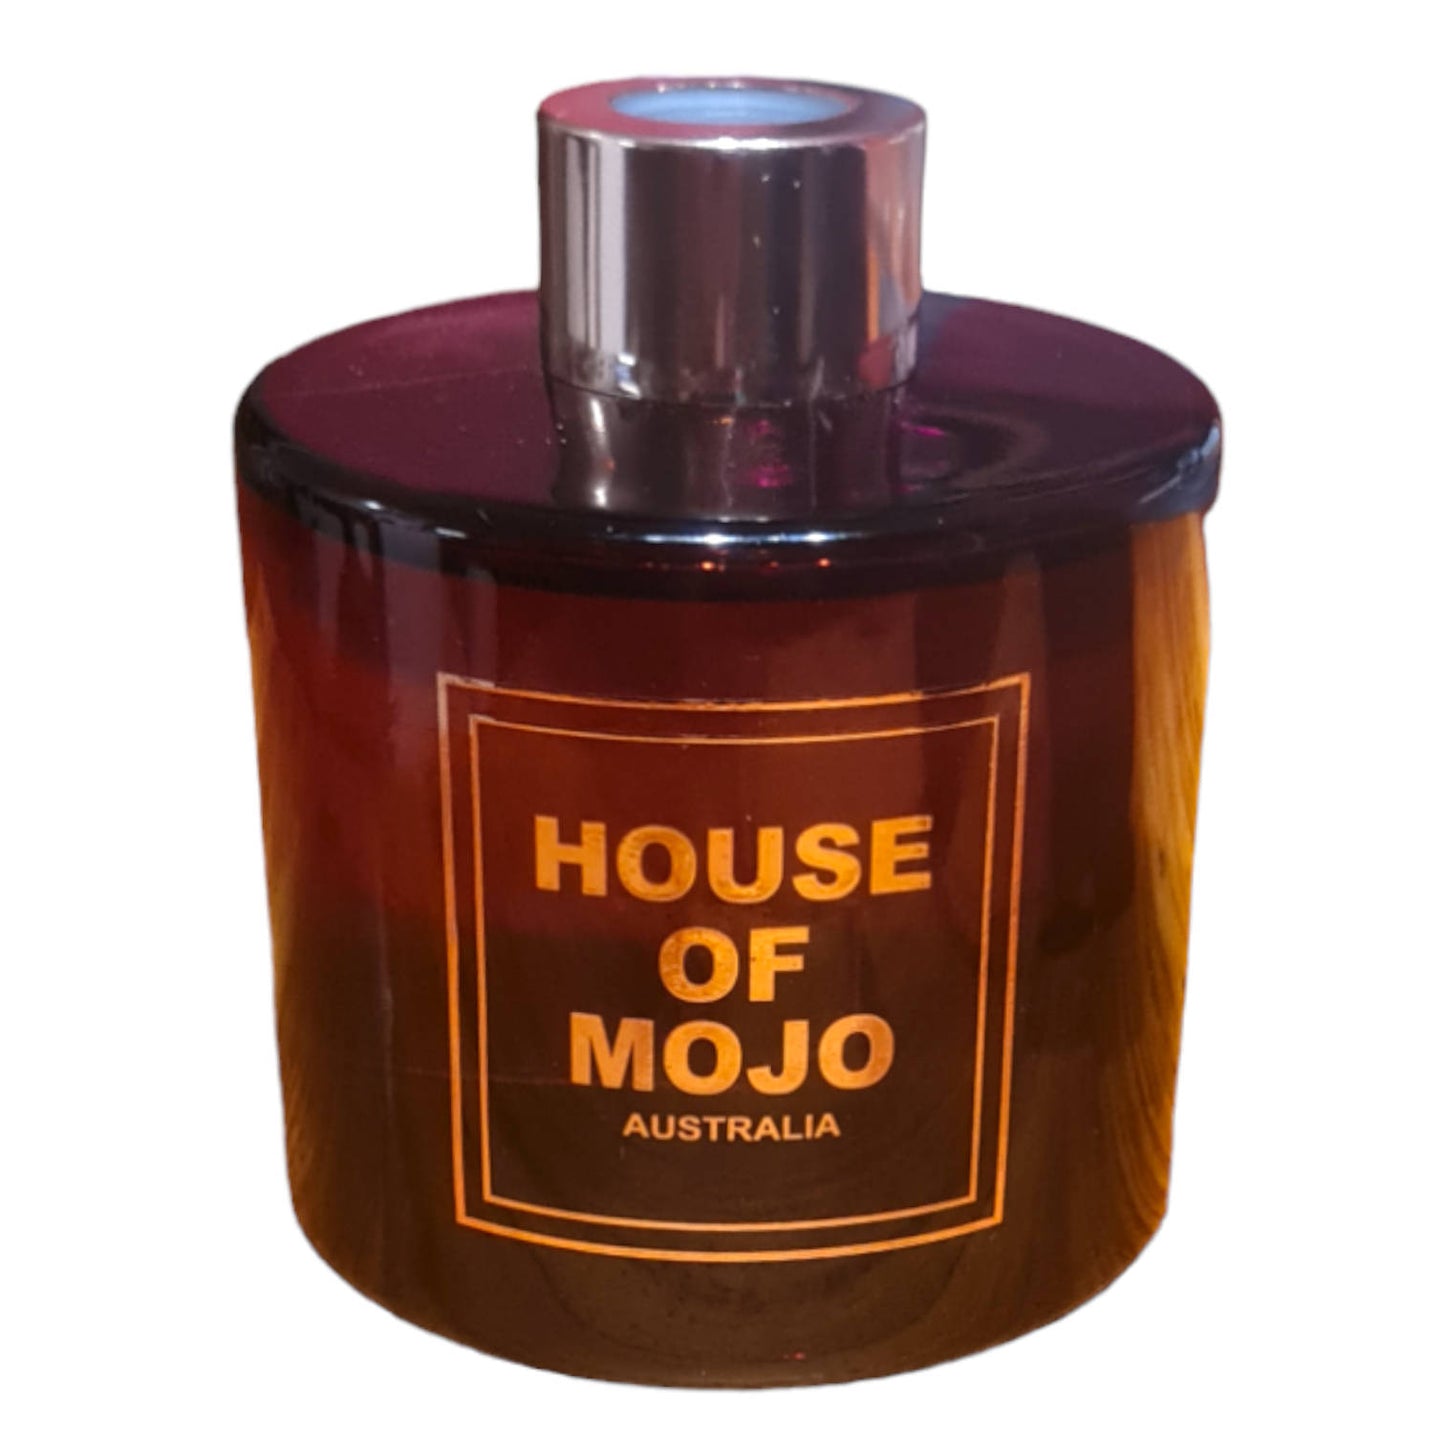 Deluxe Reed Aroma Diffuser - Mojo's Pineapple & Coconut with Cinnamon & Cloves